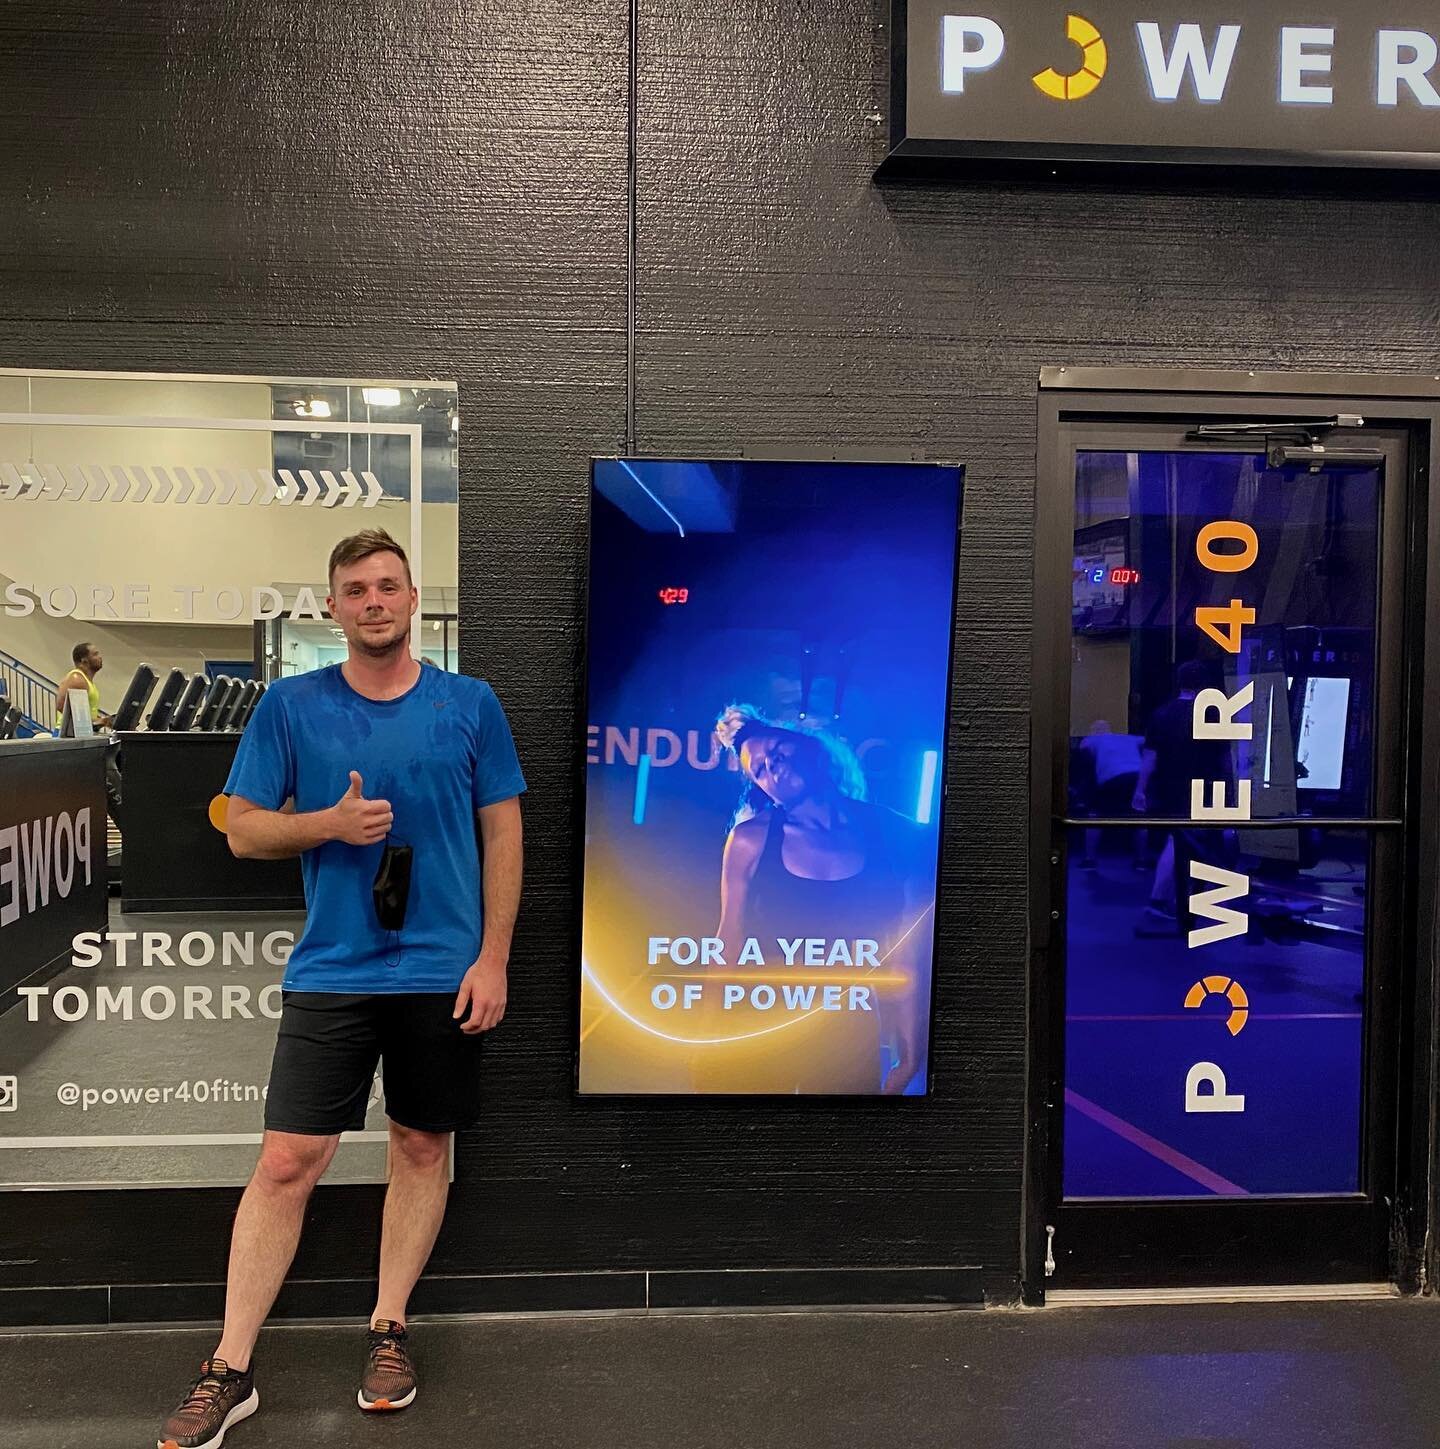 John has been a long time Power40 member since we launched in 2021! ⚡️

&ldquo;I think Power40 is great because it&rsquo;s like a workout and classroom combined! I exercise my body through a program that always demonstrates new ways to challenge myse